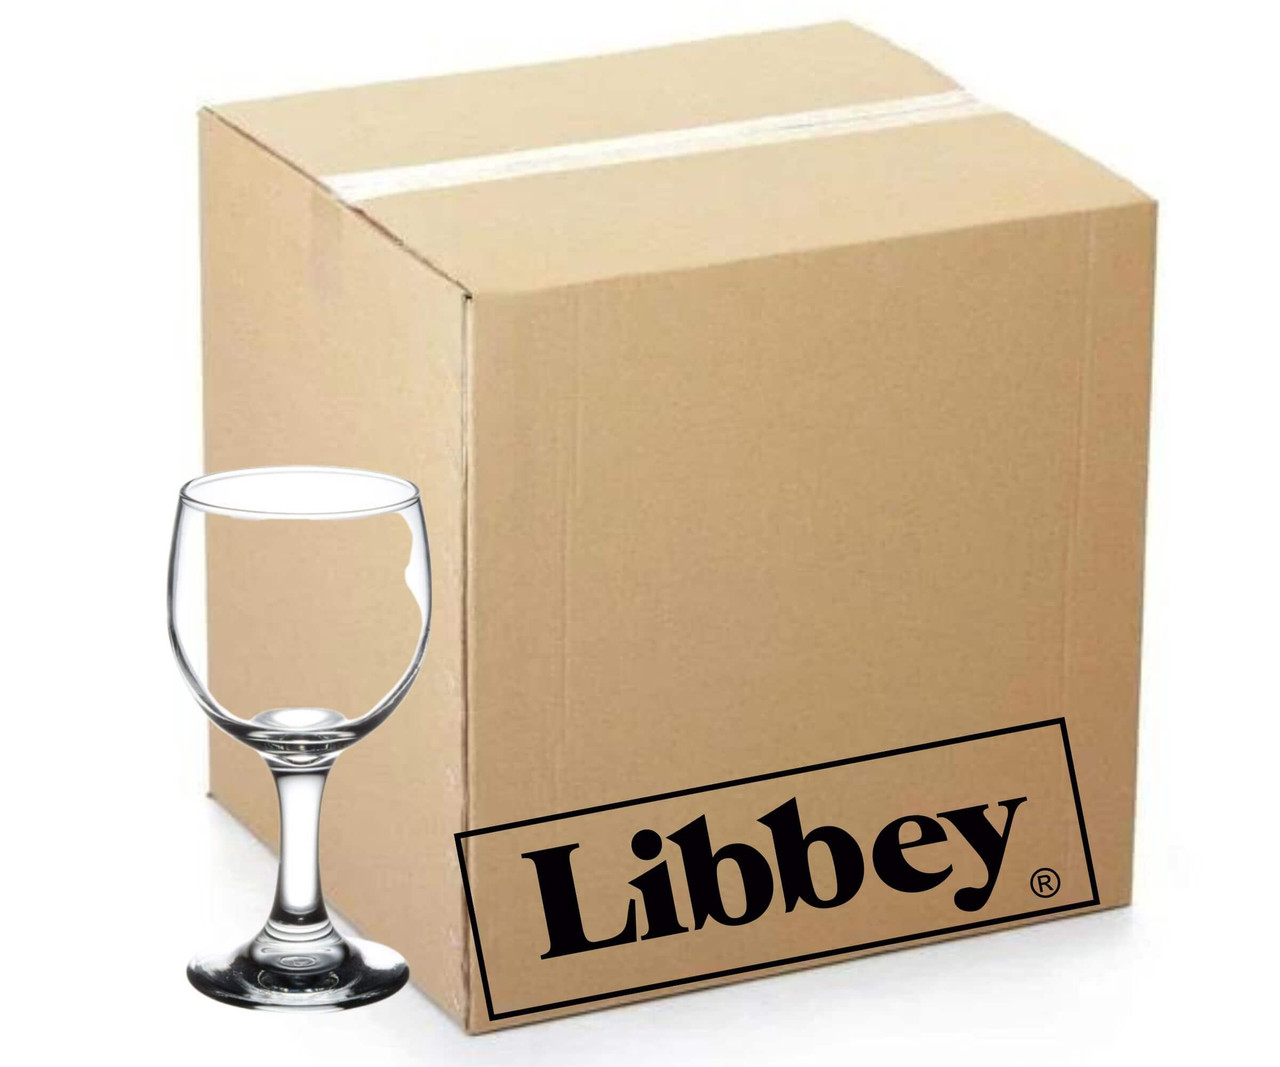 Libbey Embassy Set of 24 Chip-Resistant Wine Glasses - 6.5 oz.-Chicken Pieces